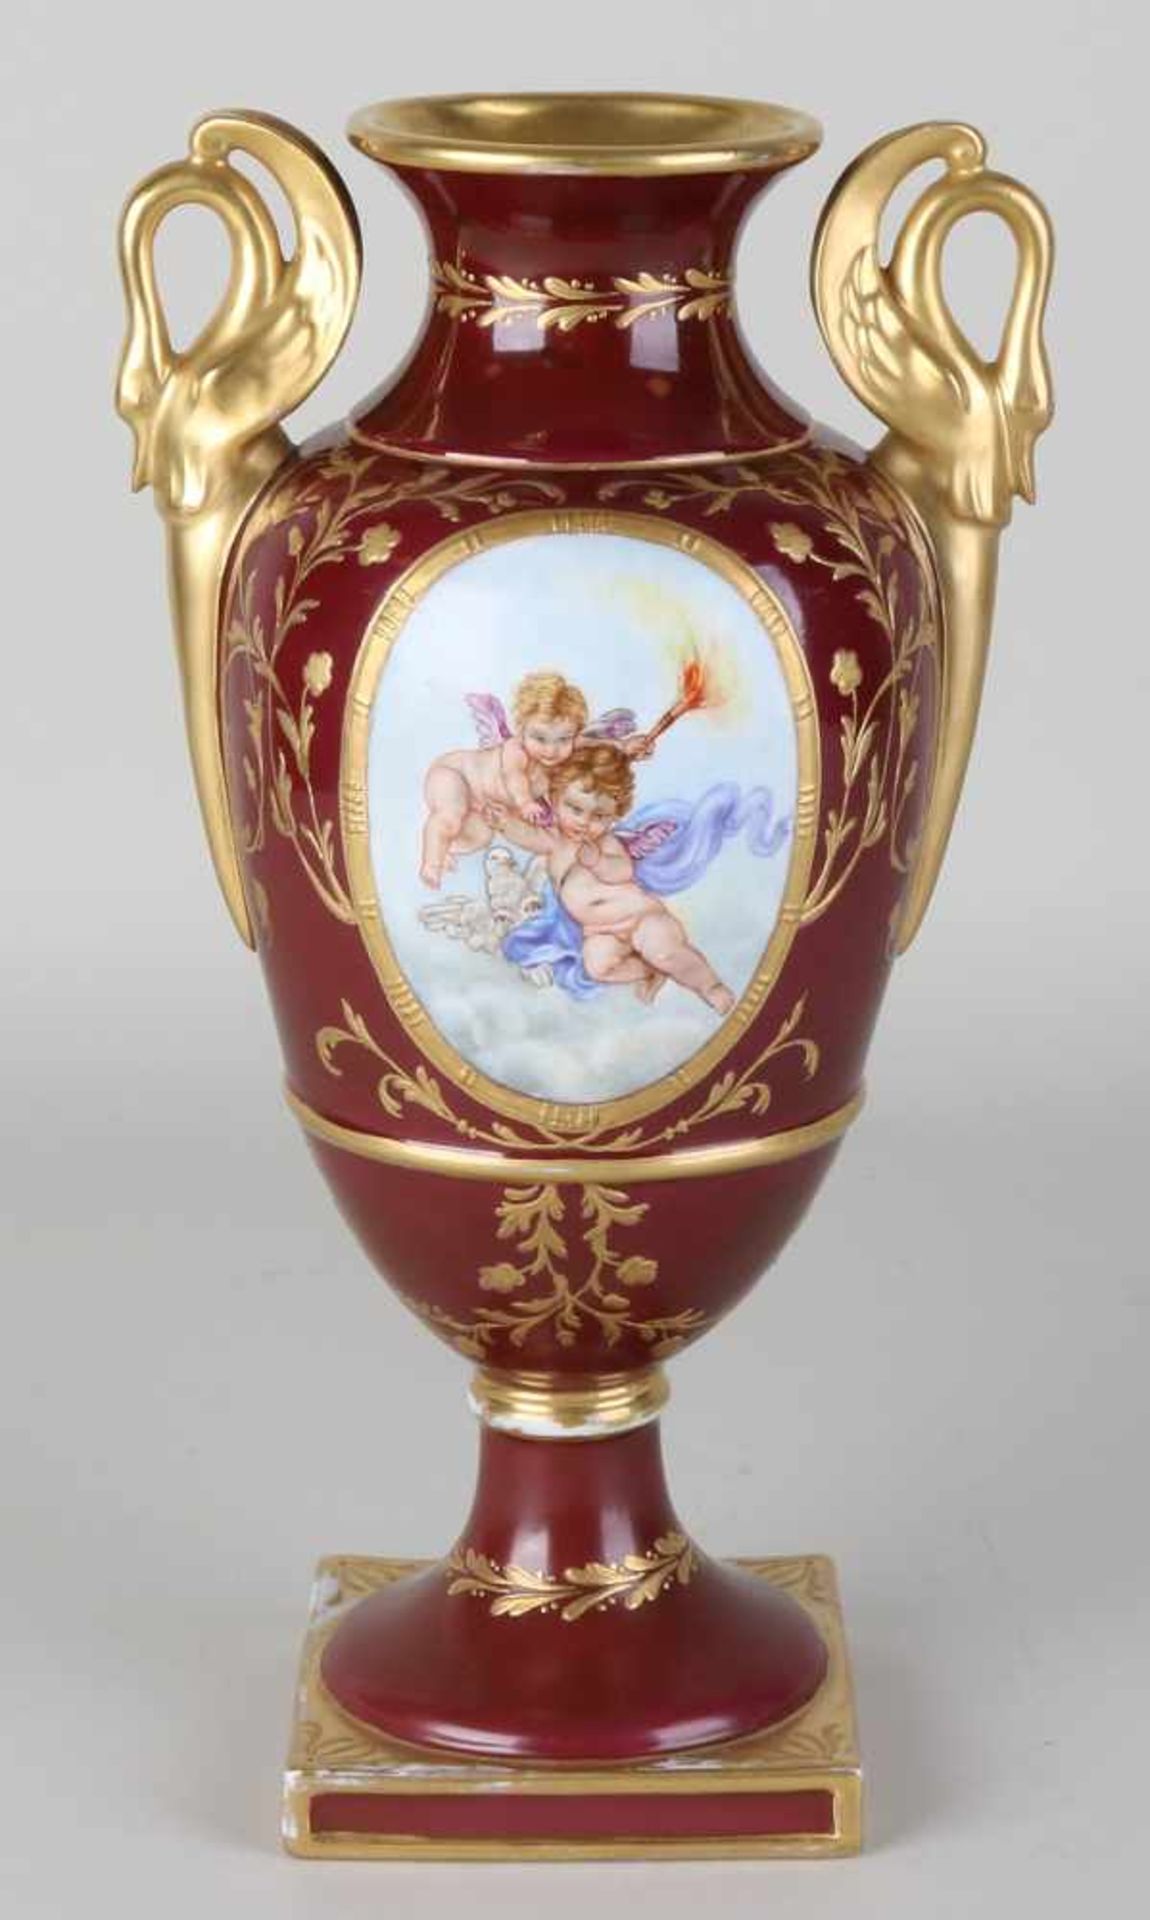 Old / antique porcelain hand-painted vase with putti and gold decor. Marked PM Dipinto a Mano.